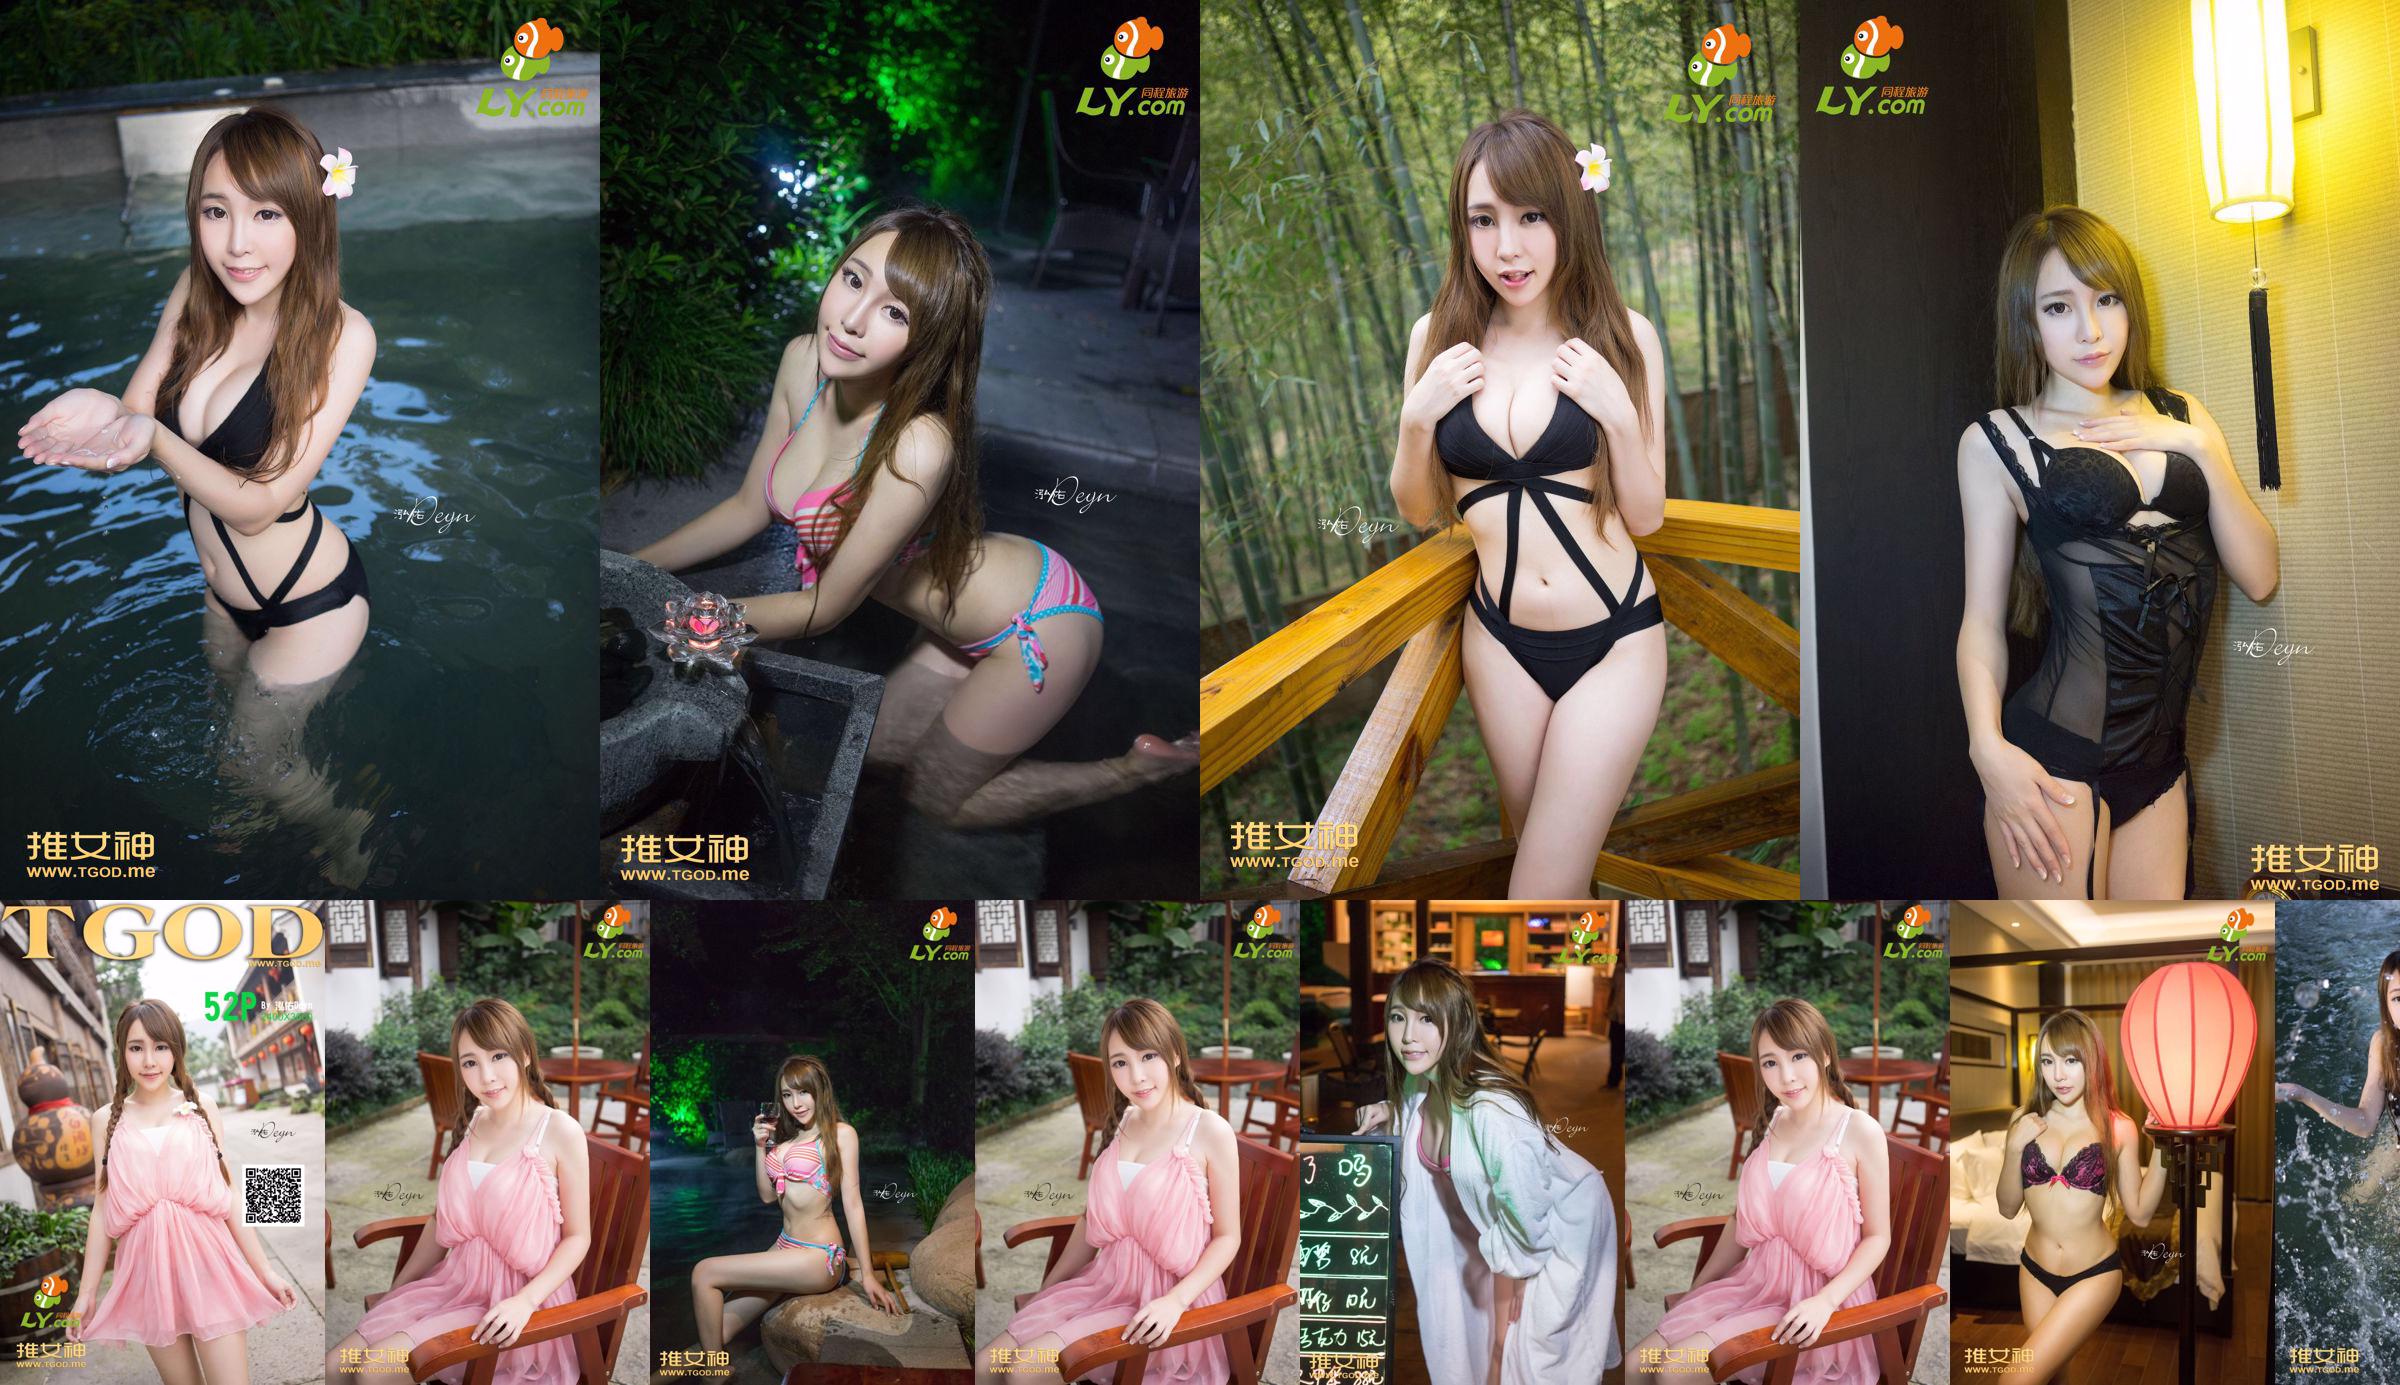 Huang Mengxian "Where Is the Goddess Going Issue 7" [TGOD Push Goddess] No.5264d3 Pagina 1